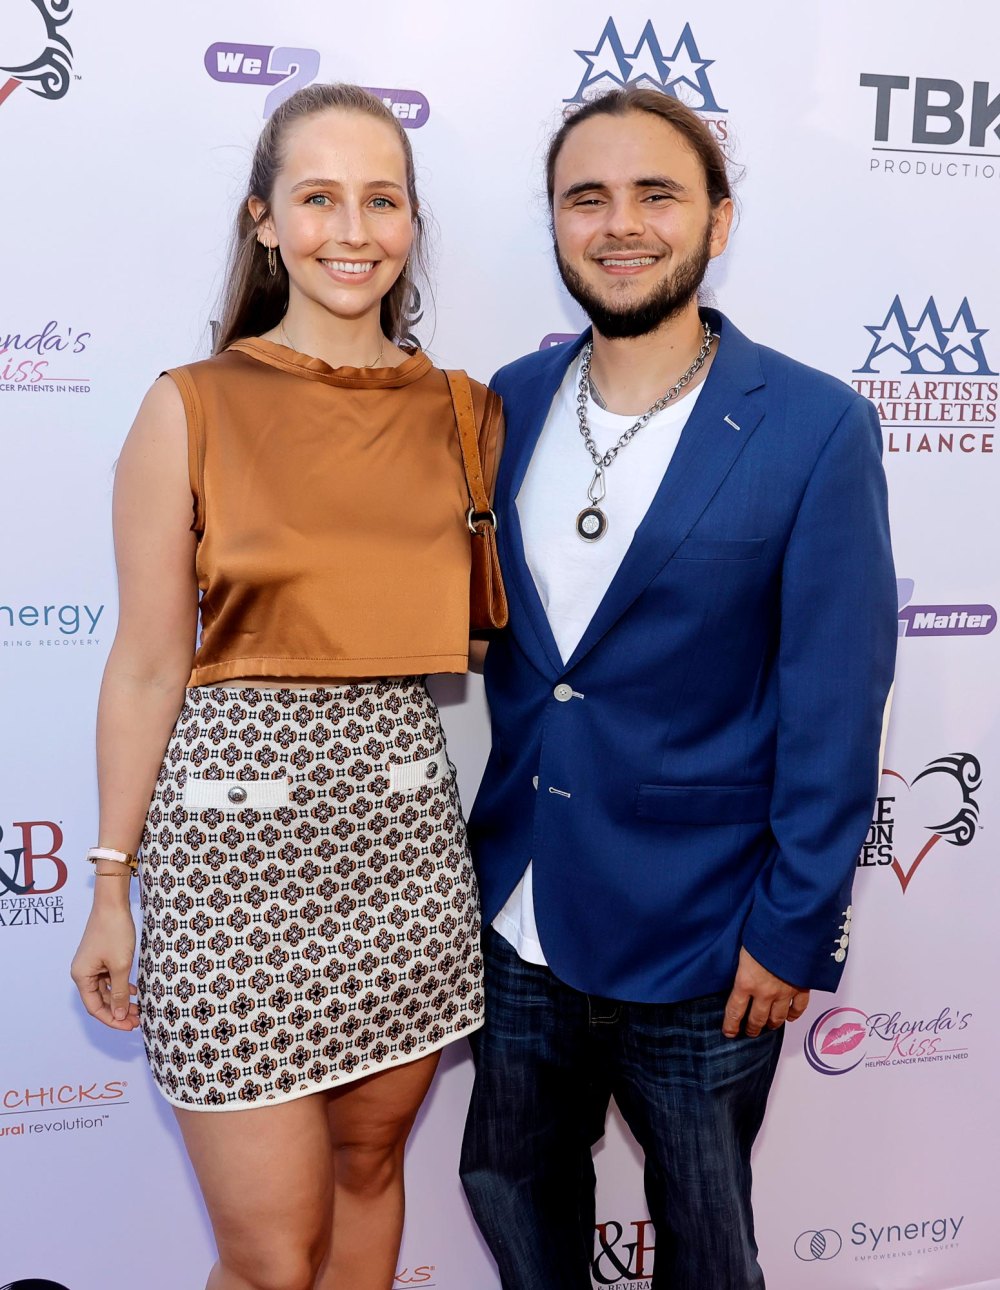 Prince Jackson and Long Time Girlfriend Molly Schirmang Are Going Strong With No Plans for Engagement 622